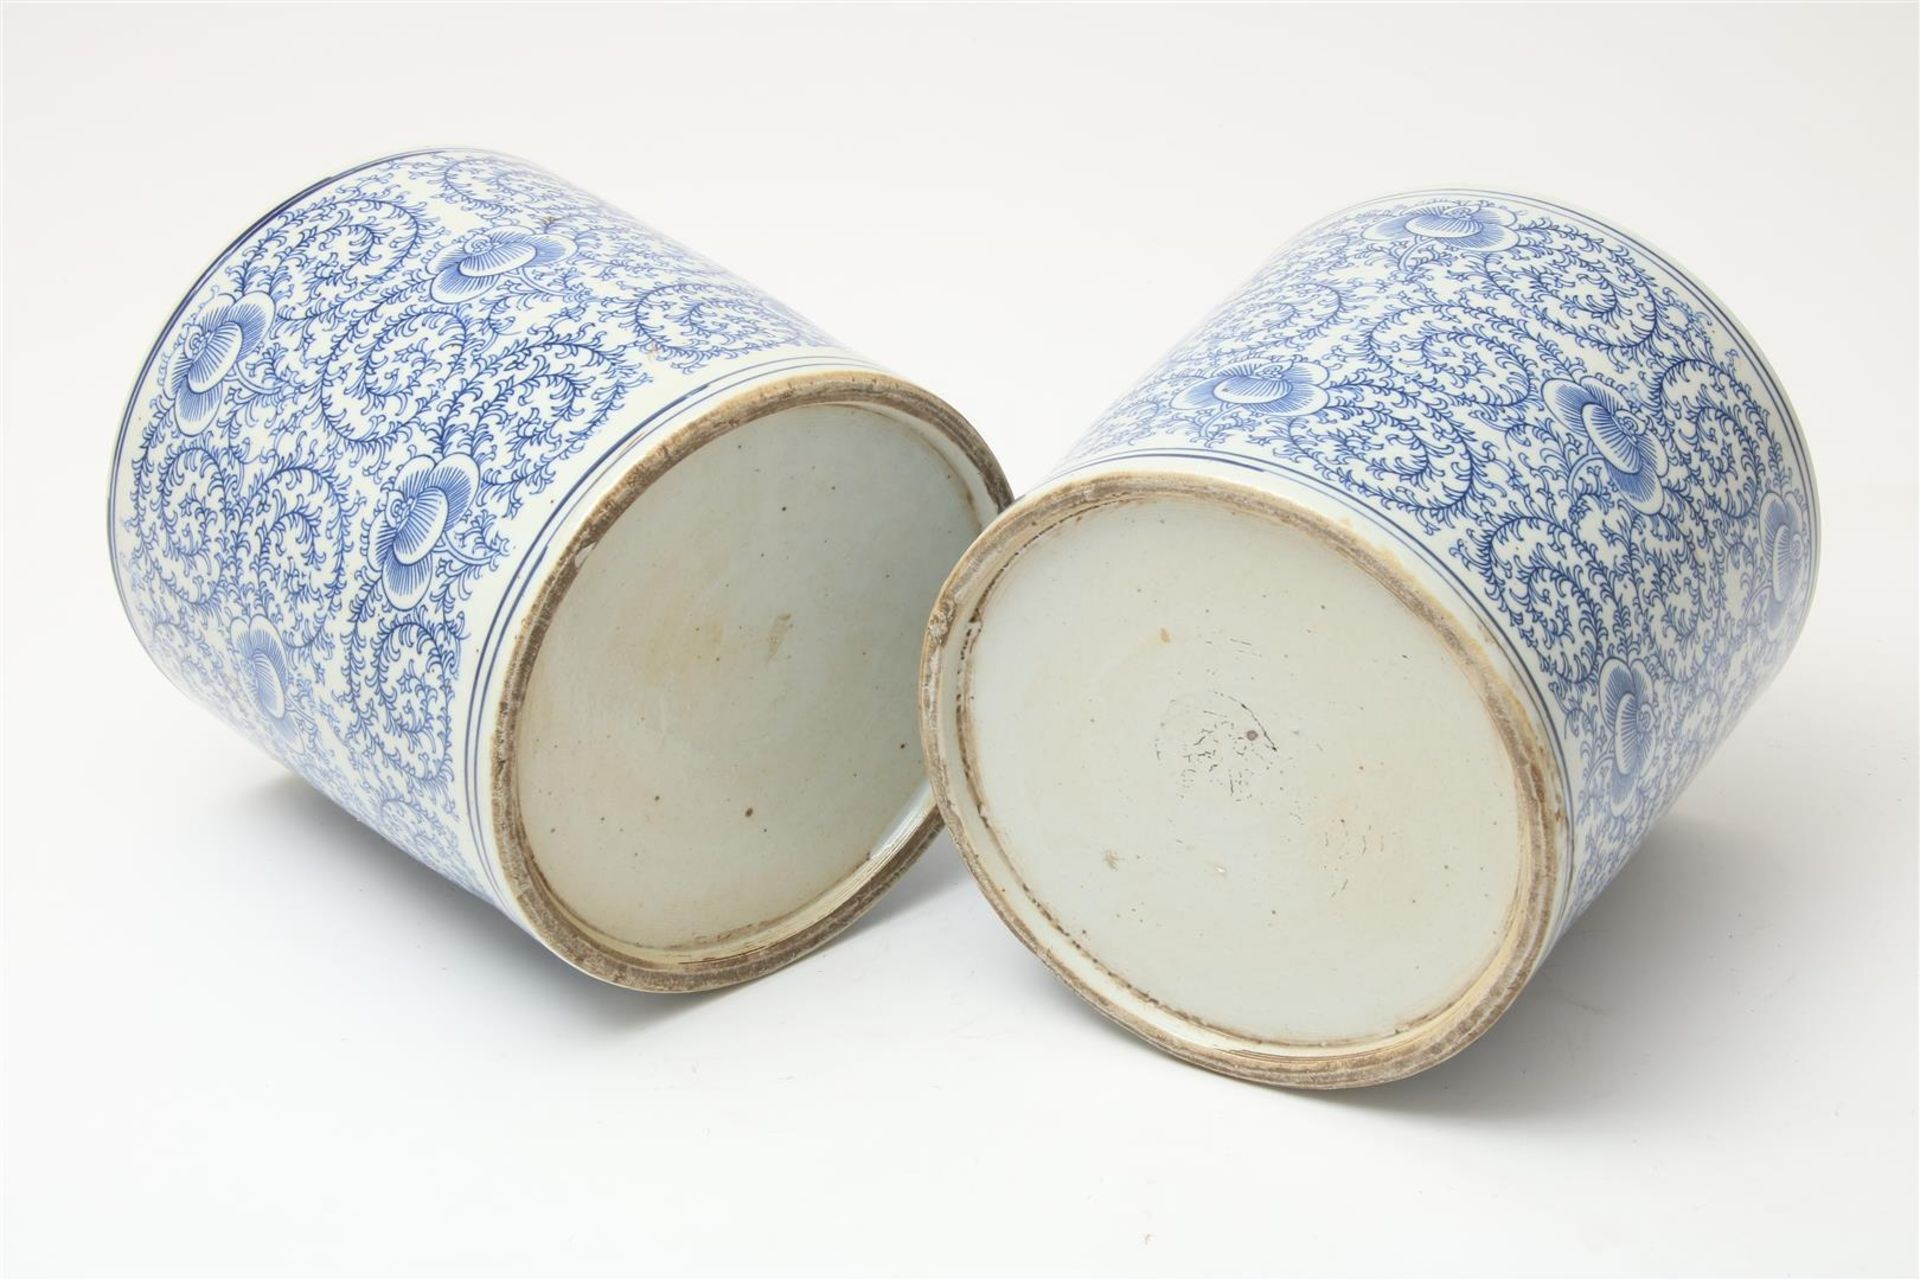 Set of blue and white porcelain pots decorated with flowers, China 20th century, h. 20 dia. 20.5 - Image 3 of 3